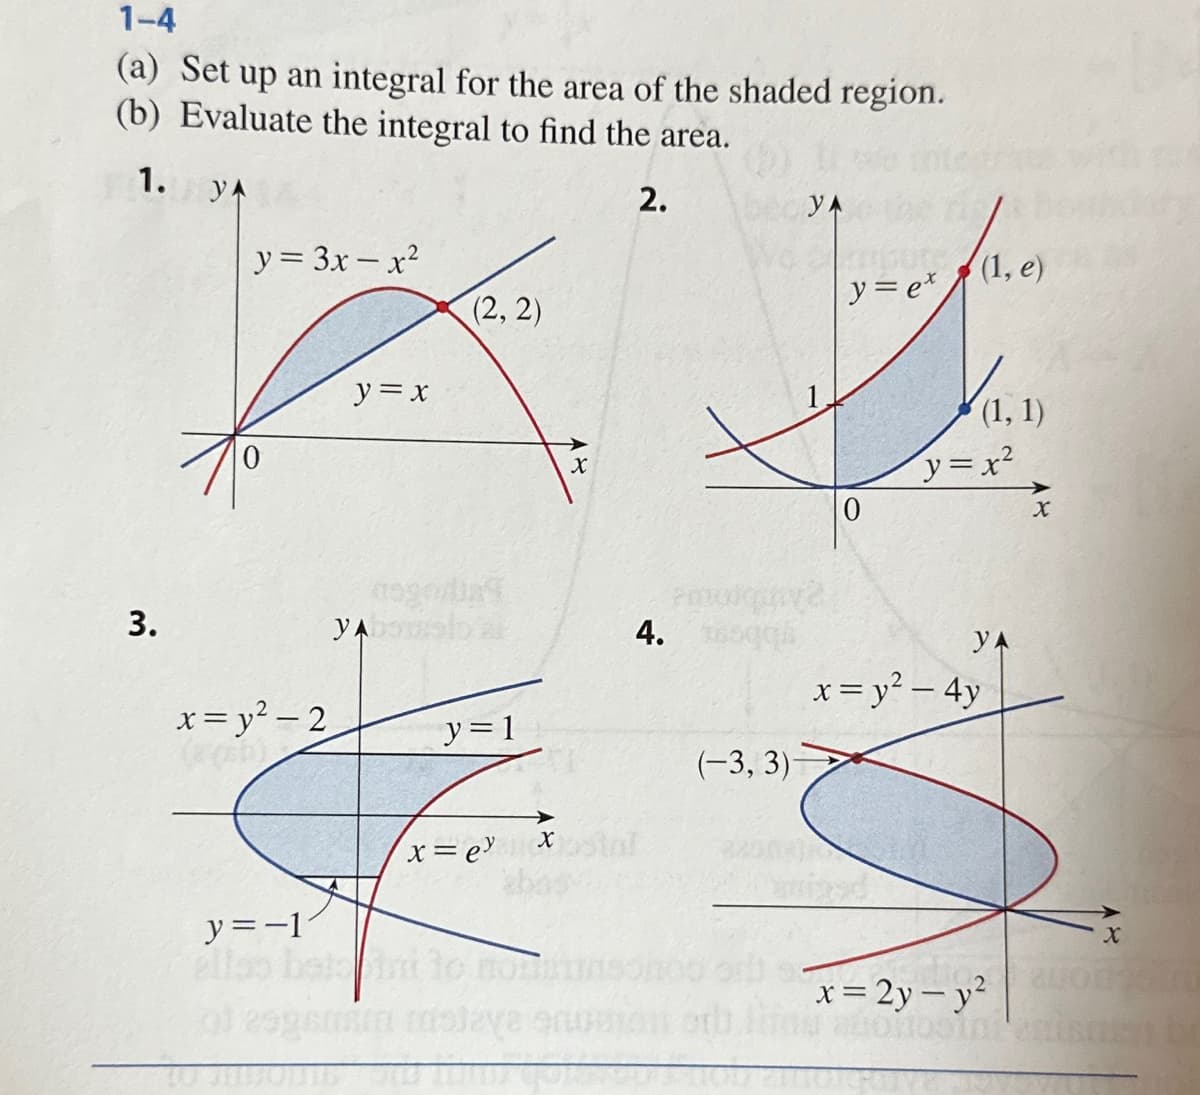 1-4
(a) Set up an integral for the area of the shaded region.
(b) Evaluate the integral to find the area.
1. y
2.
3.
y = 3x-x²
x=y² - 2
y = -1
y = x
УА
(2, 2)
nogordias
y = 1
x = ex
30 cm
X
emolqav2
4. 1550
YA
(-3, 3)
y=ex
0
(1, e)
(1, 1)
y=x²
УА
x = y² - 4y
x = 2y-y²
X
X